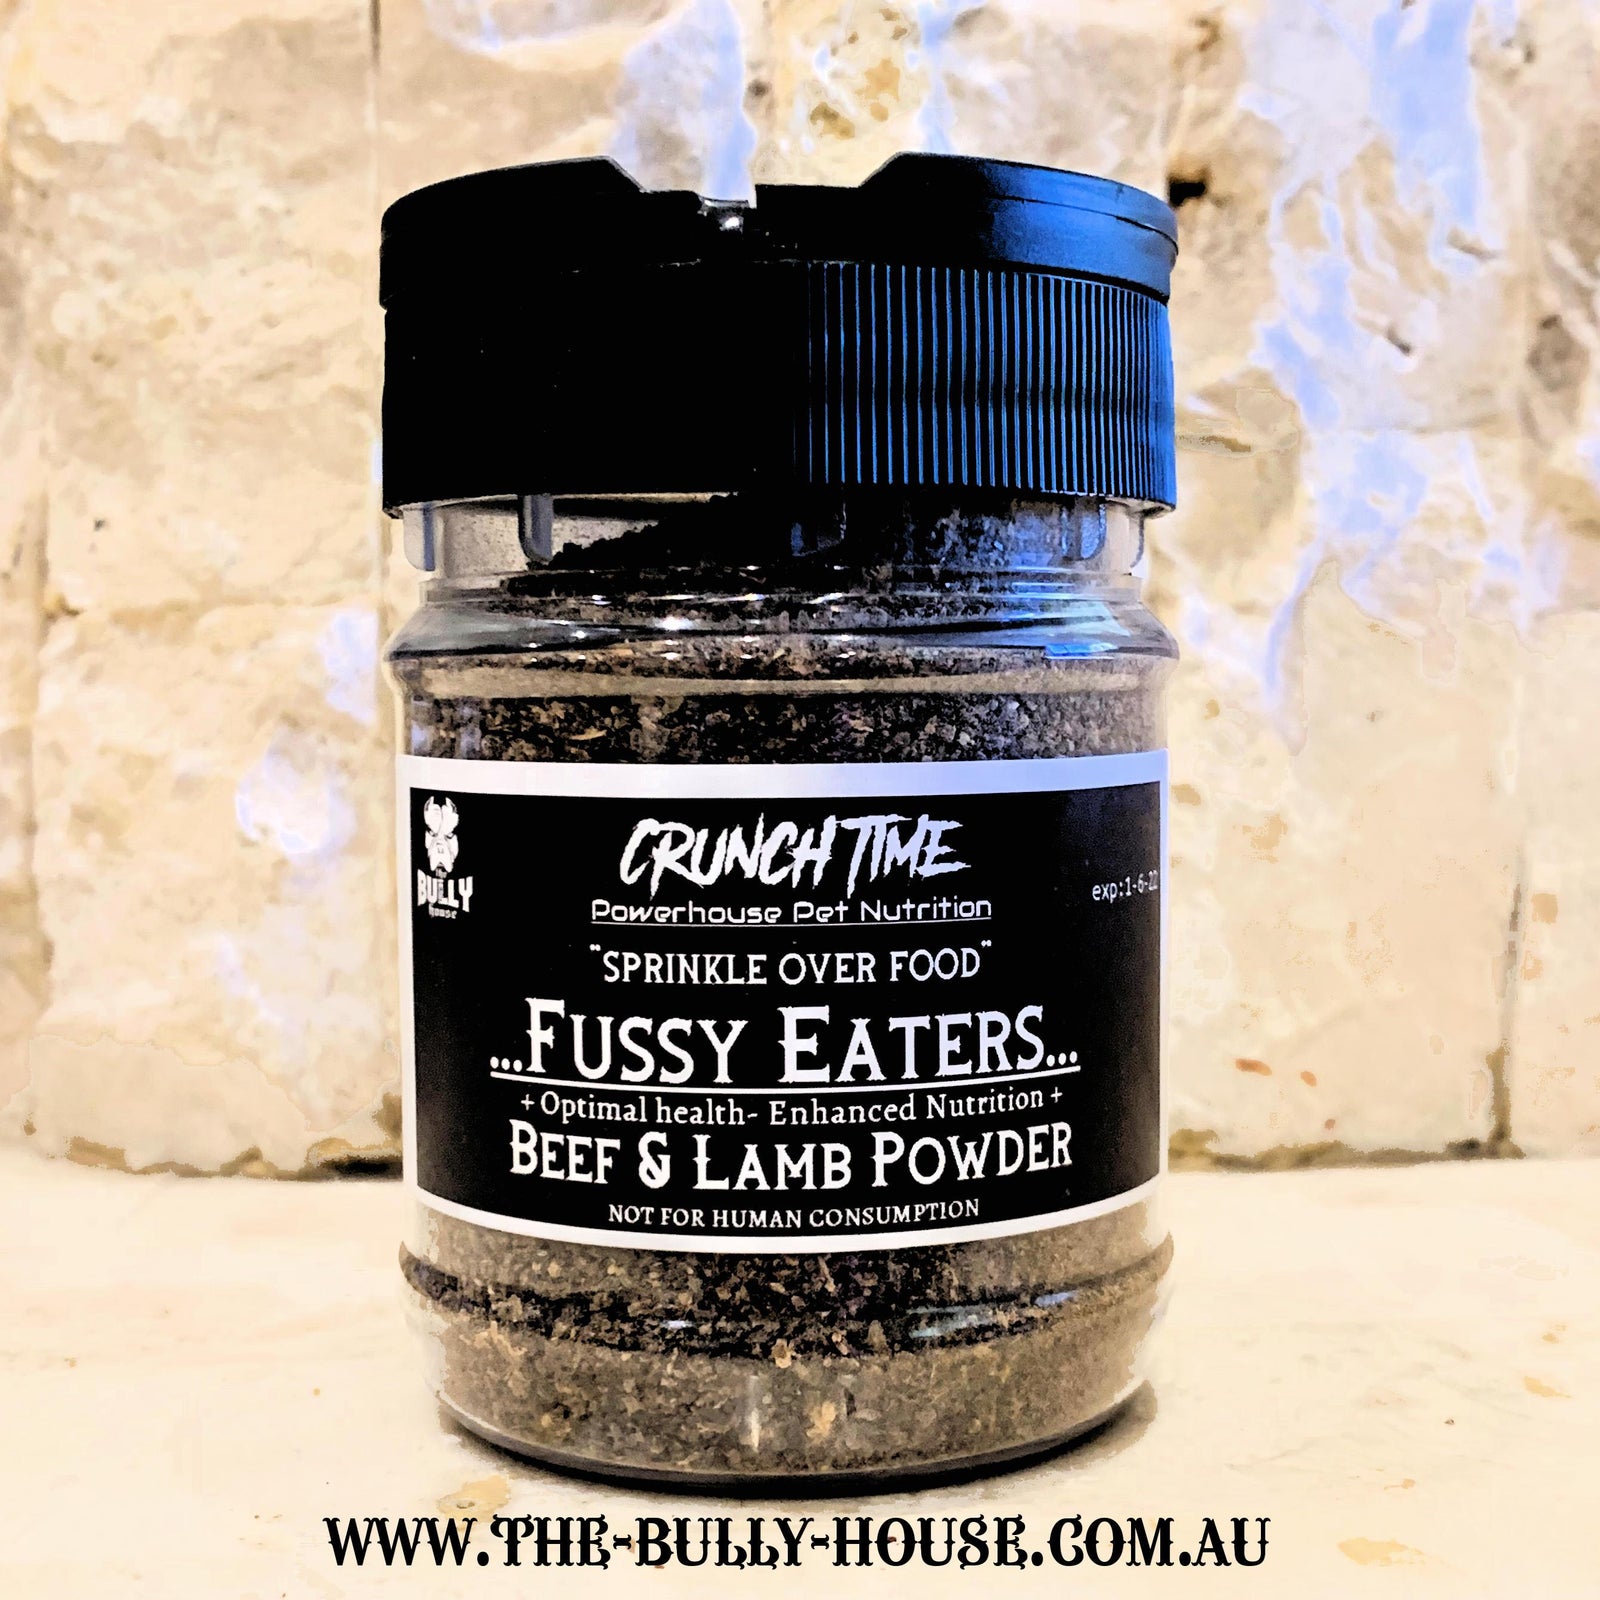 Beef and Lamb POWDER - Fussy Eaters - ADD TO MEAL - Crunch time - Dog Nutrition